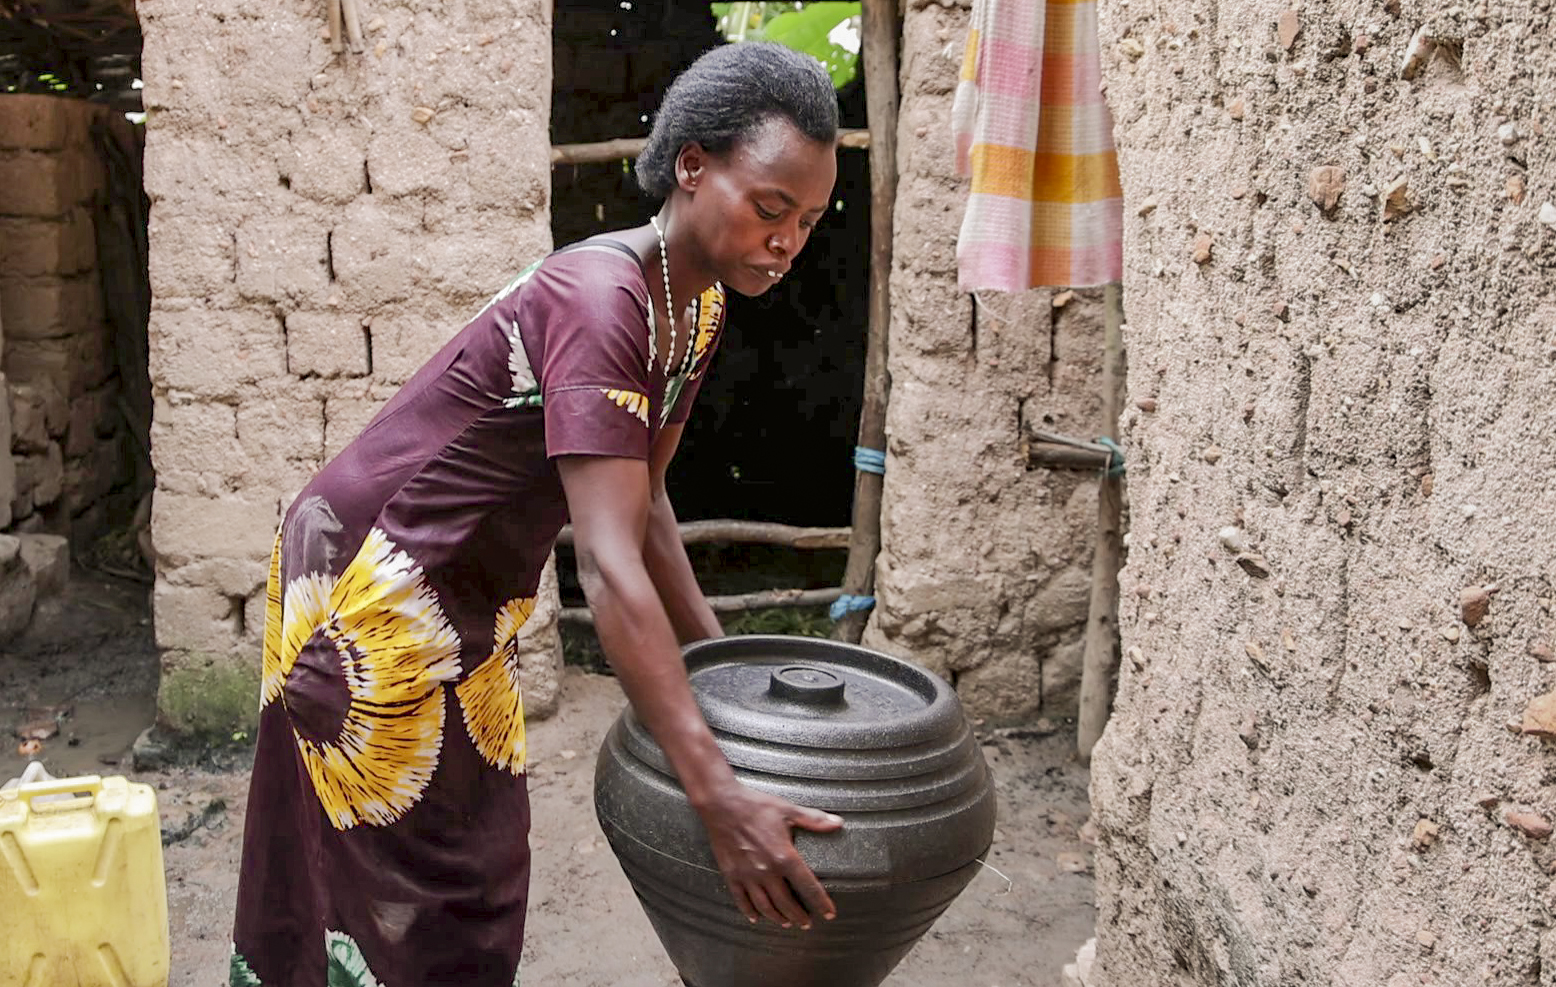 Woman holding a cooking pot, and participating in household chores.